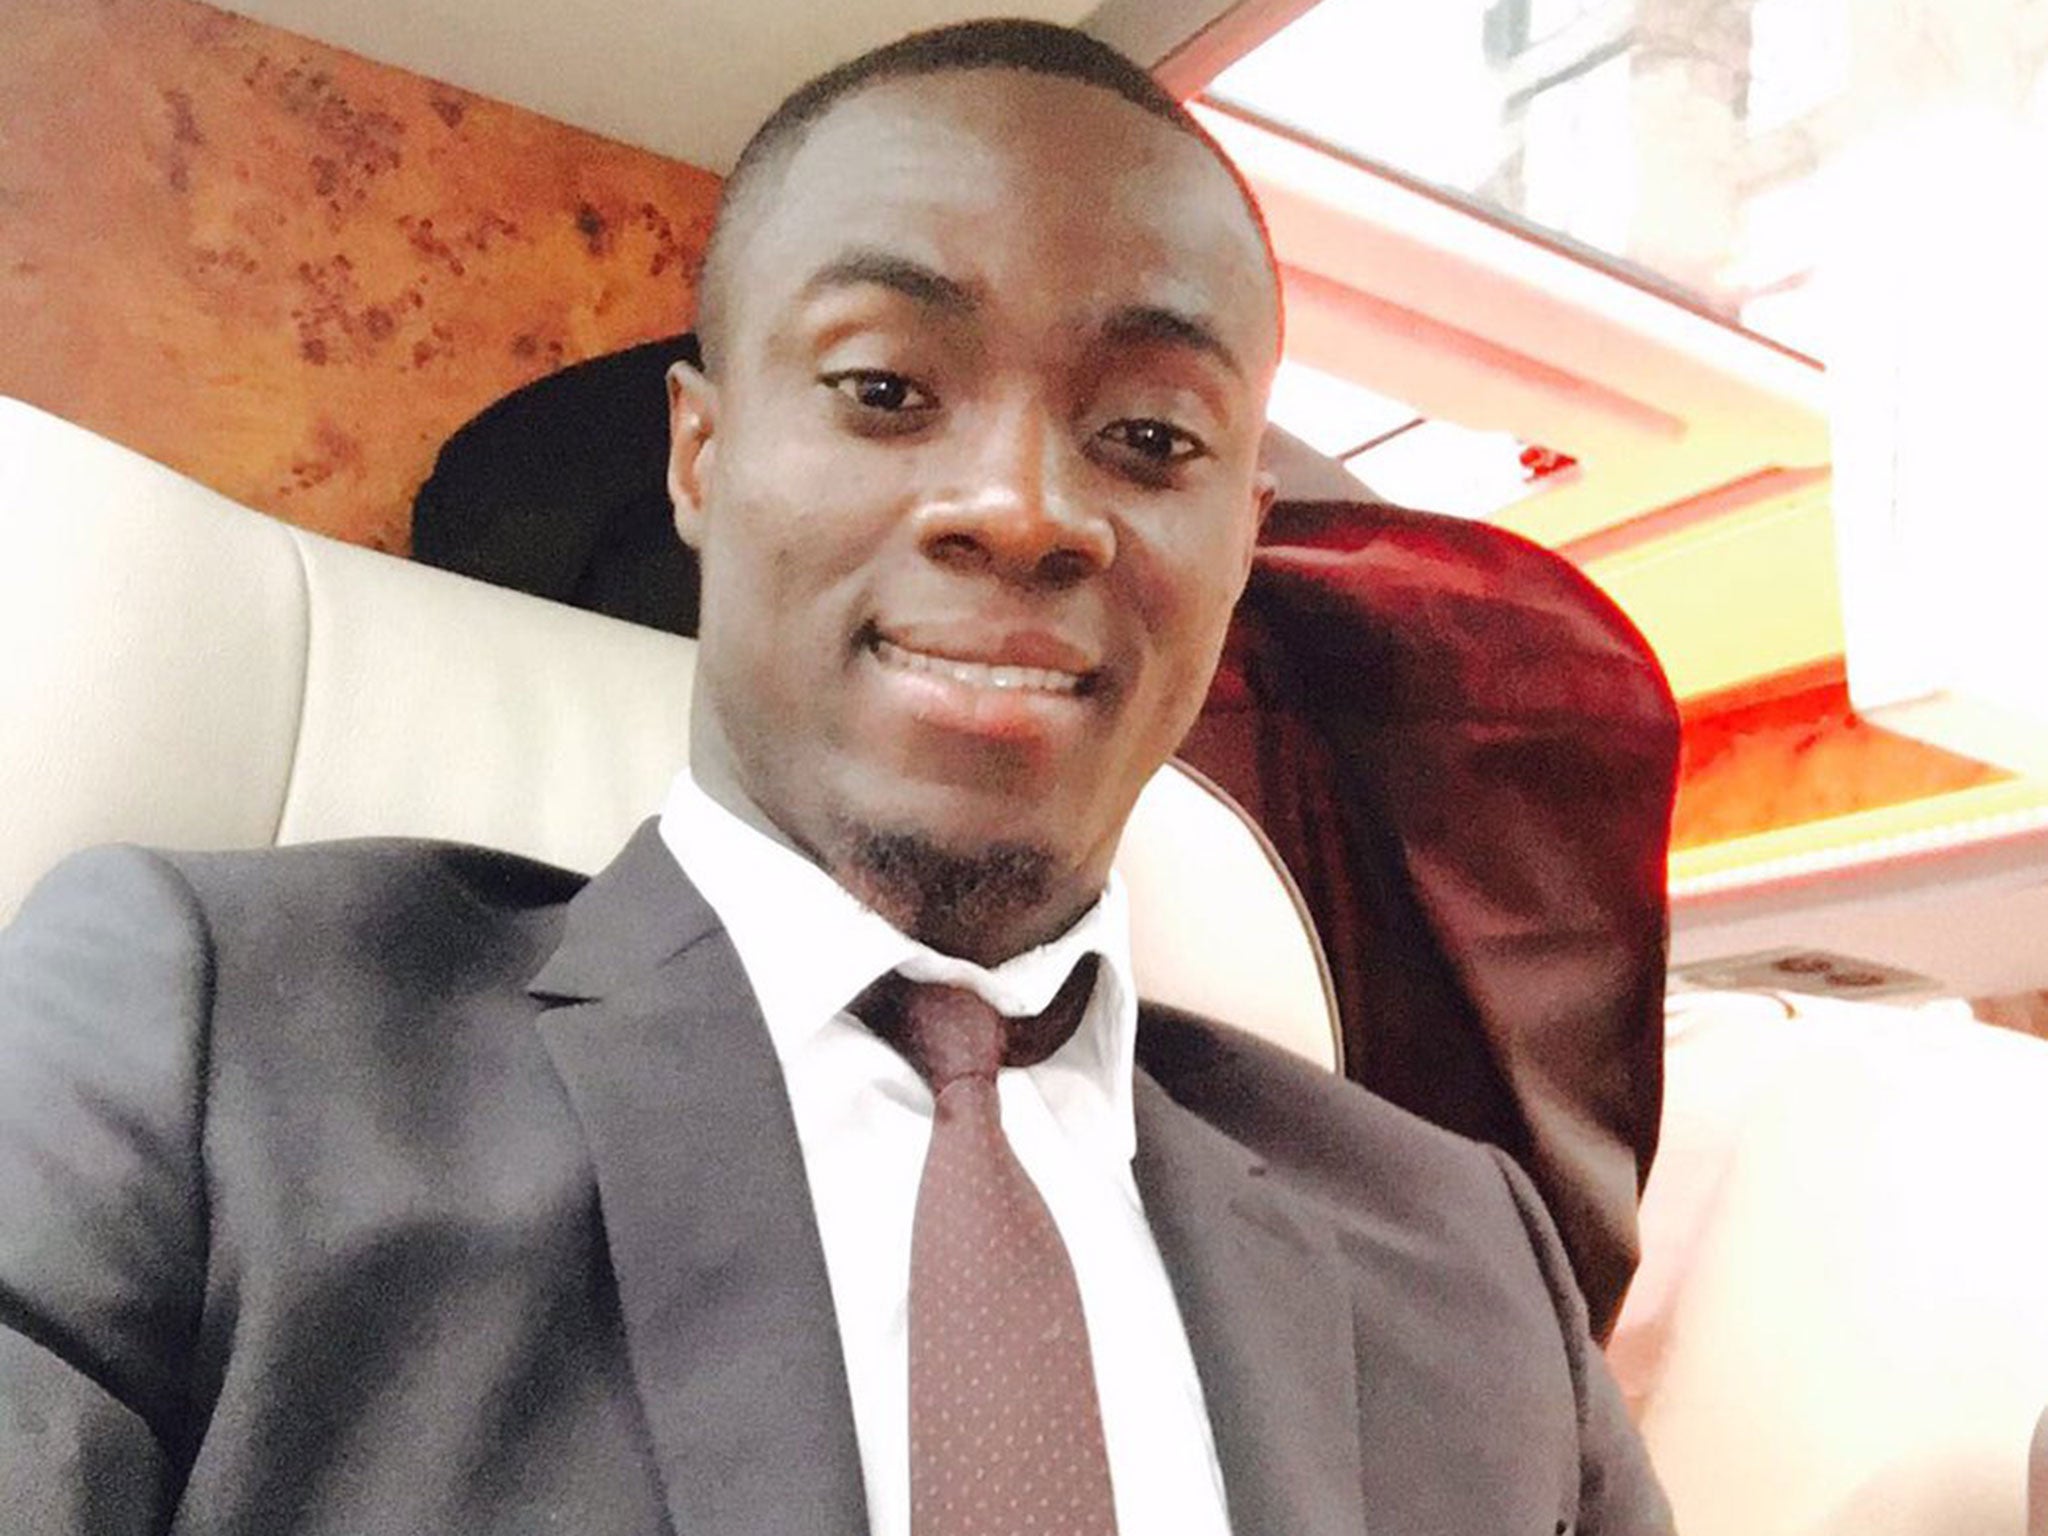 Eric Bailly posted a positive injury update on Twitter to the delight of Manchester United fans